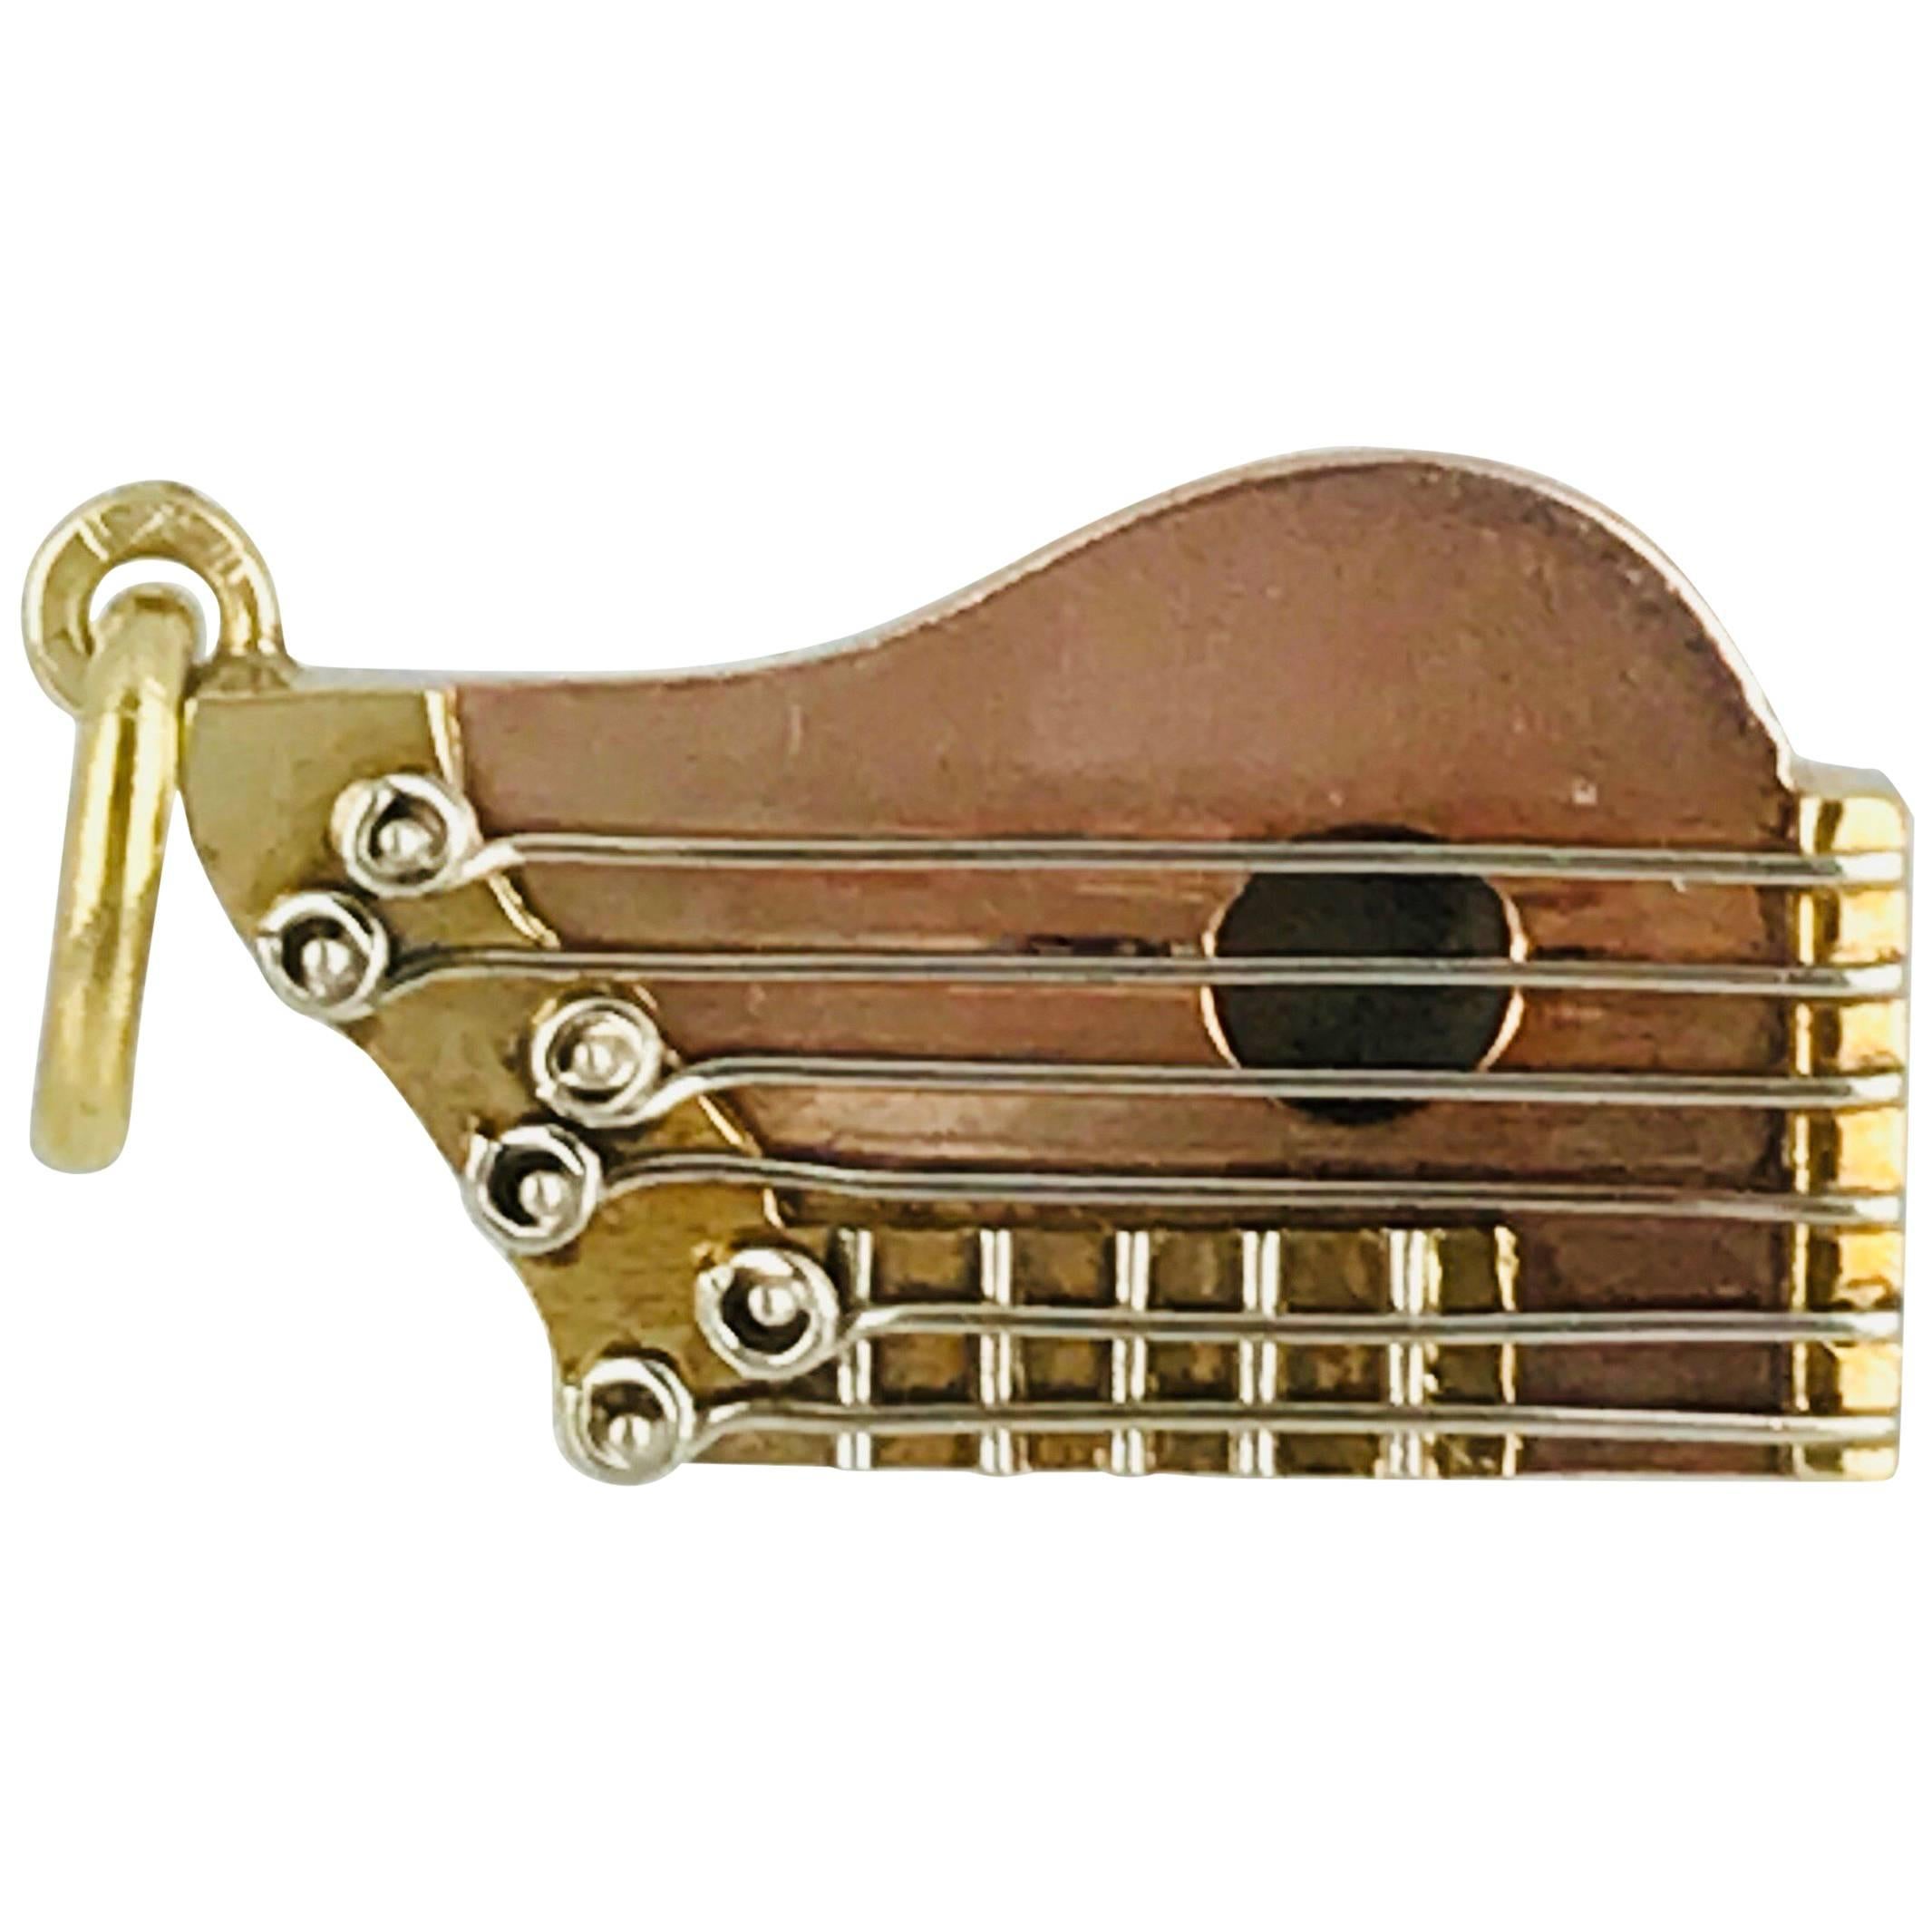 Zither Musical Instrument, Charm, 18 Karat Yellow Gold with White Strings, Rare For Sale